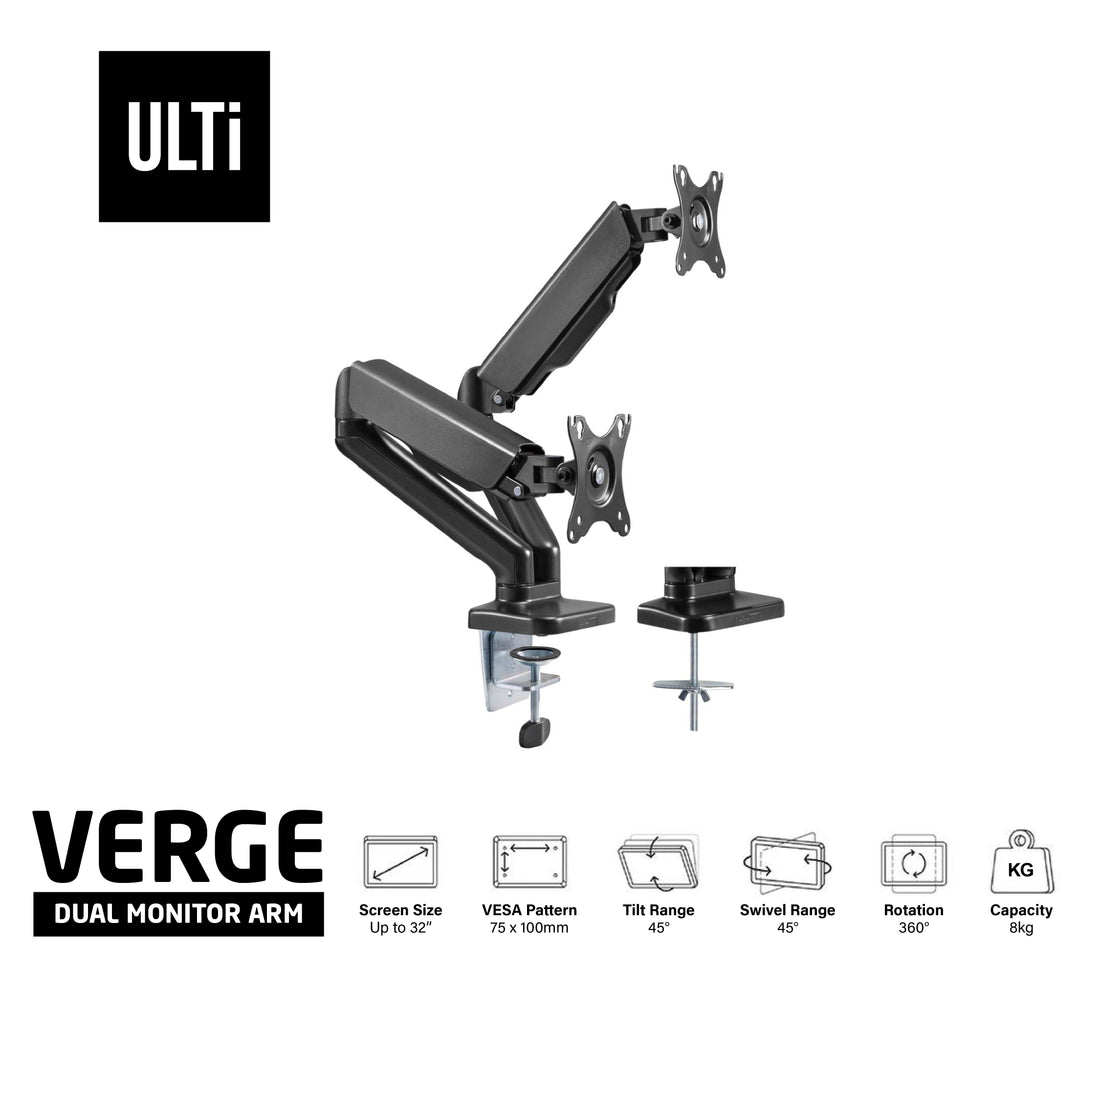 ULTi Verge Dual Gas Spring Monitor Desk Mount, Full Motion Swivel Arm, VESA Stand w/ C Clamp & Grommet, up to 32" Screen, 9kg